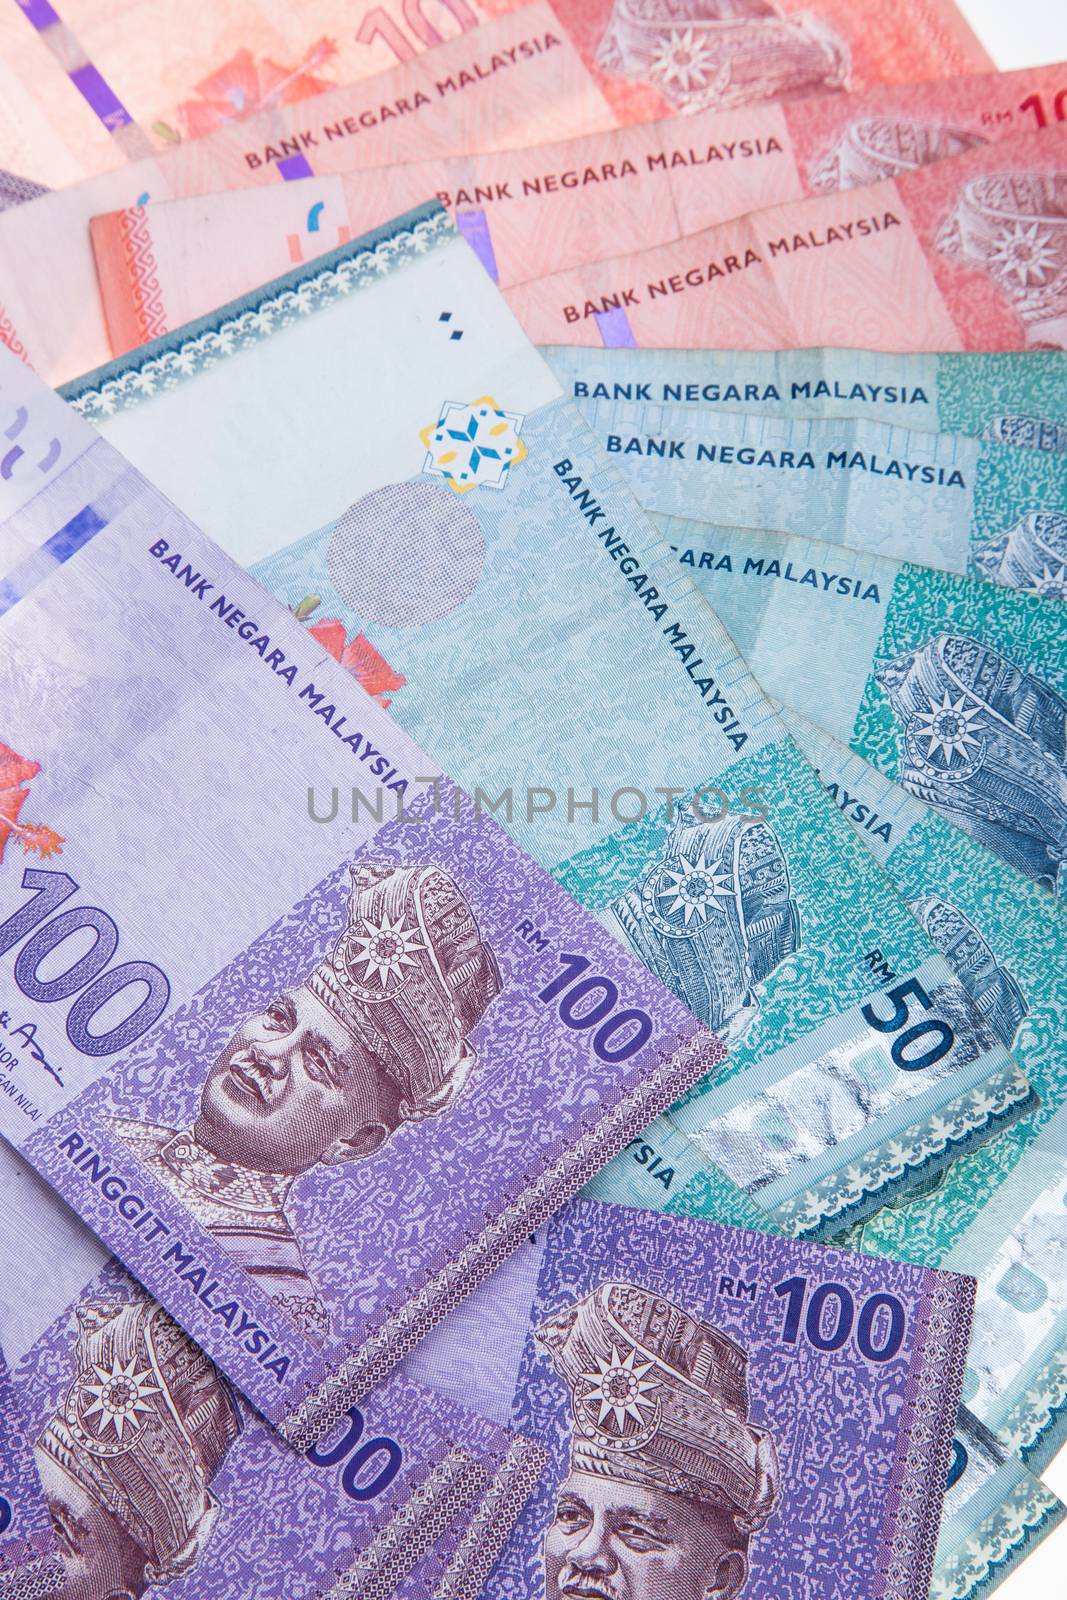 Malaysian currency by tehcheesiong